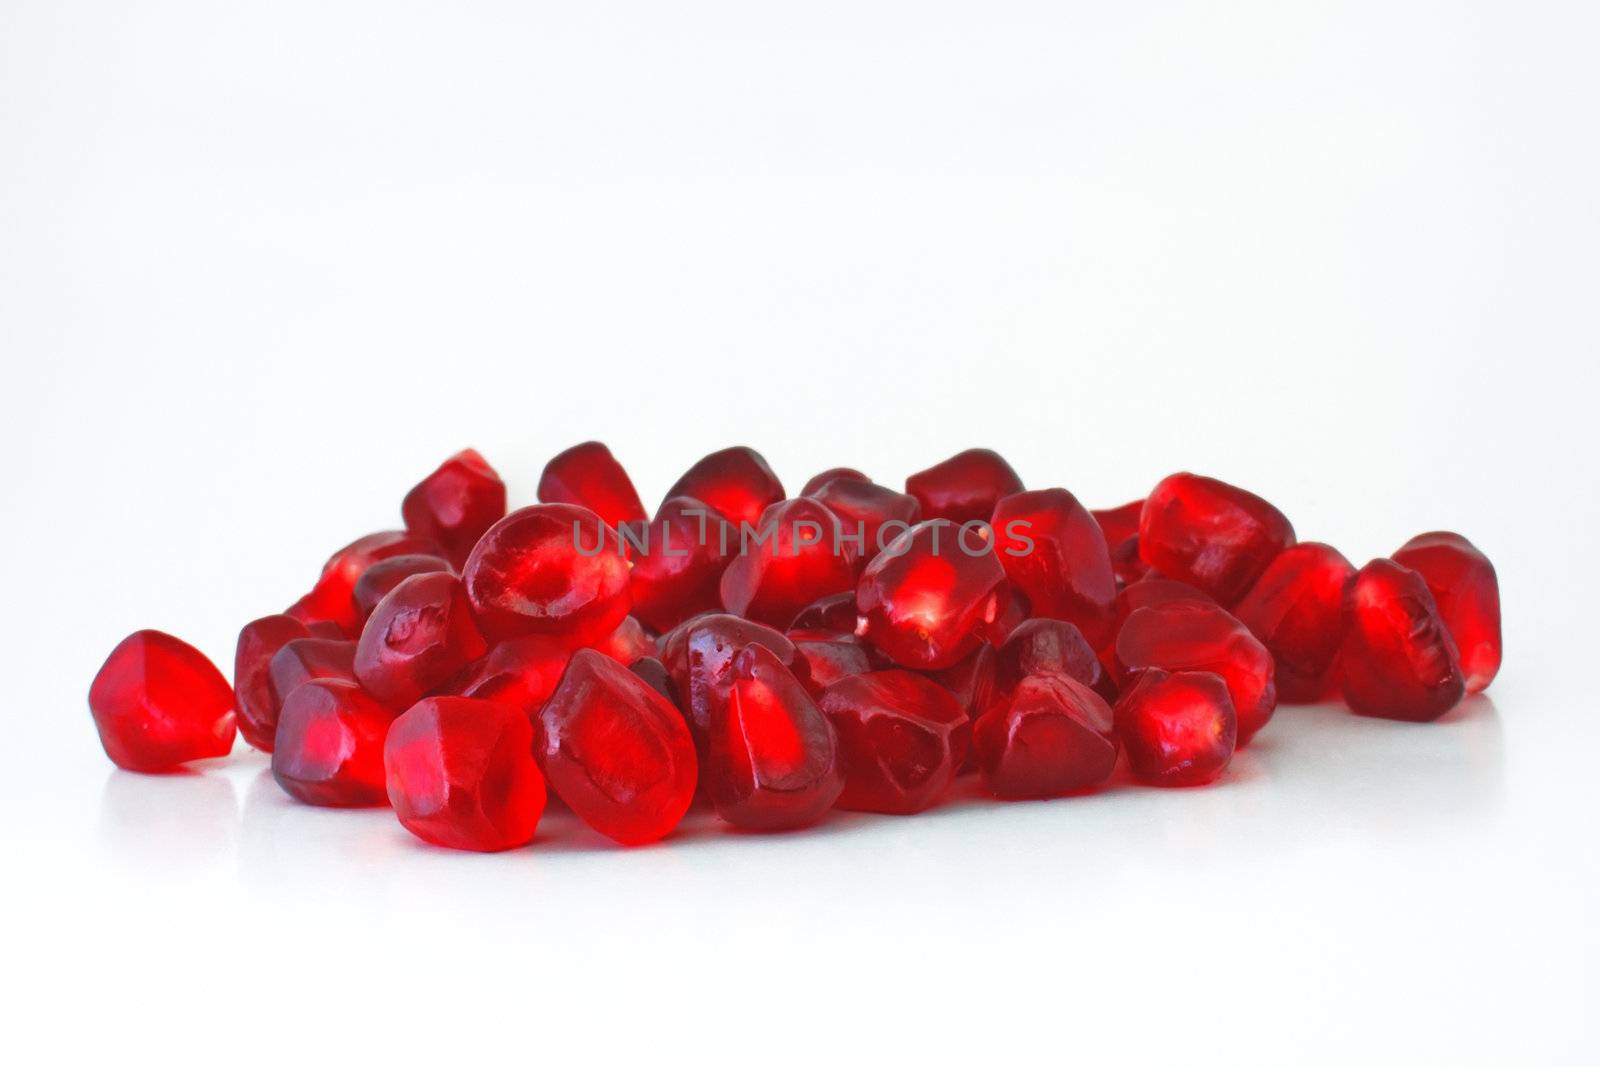 Pomegranate seeds, close-up, on a white background